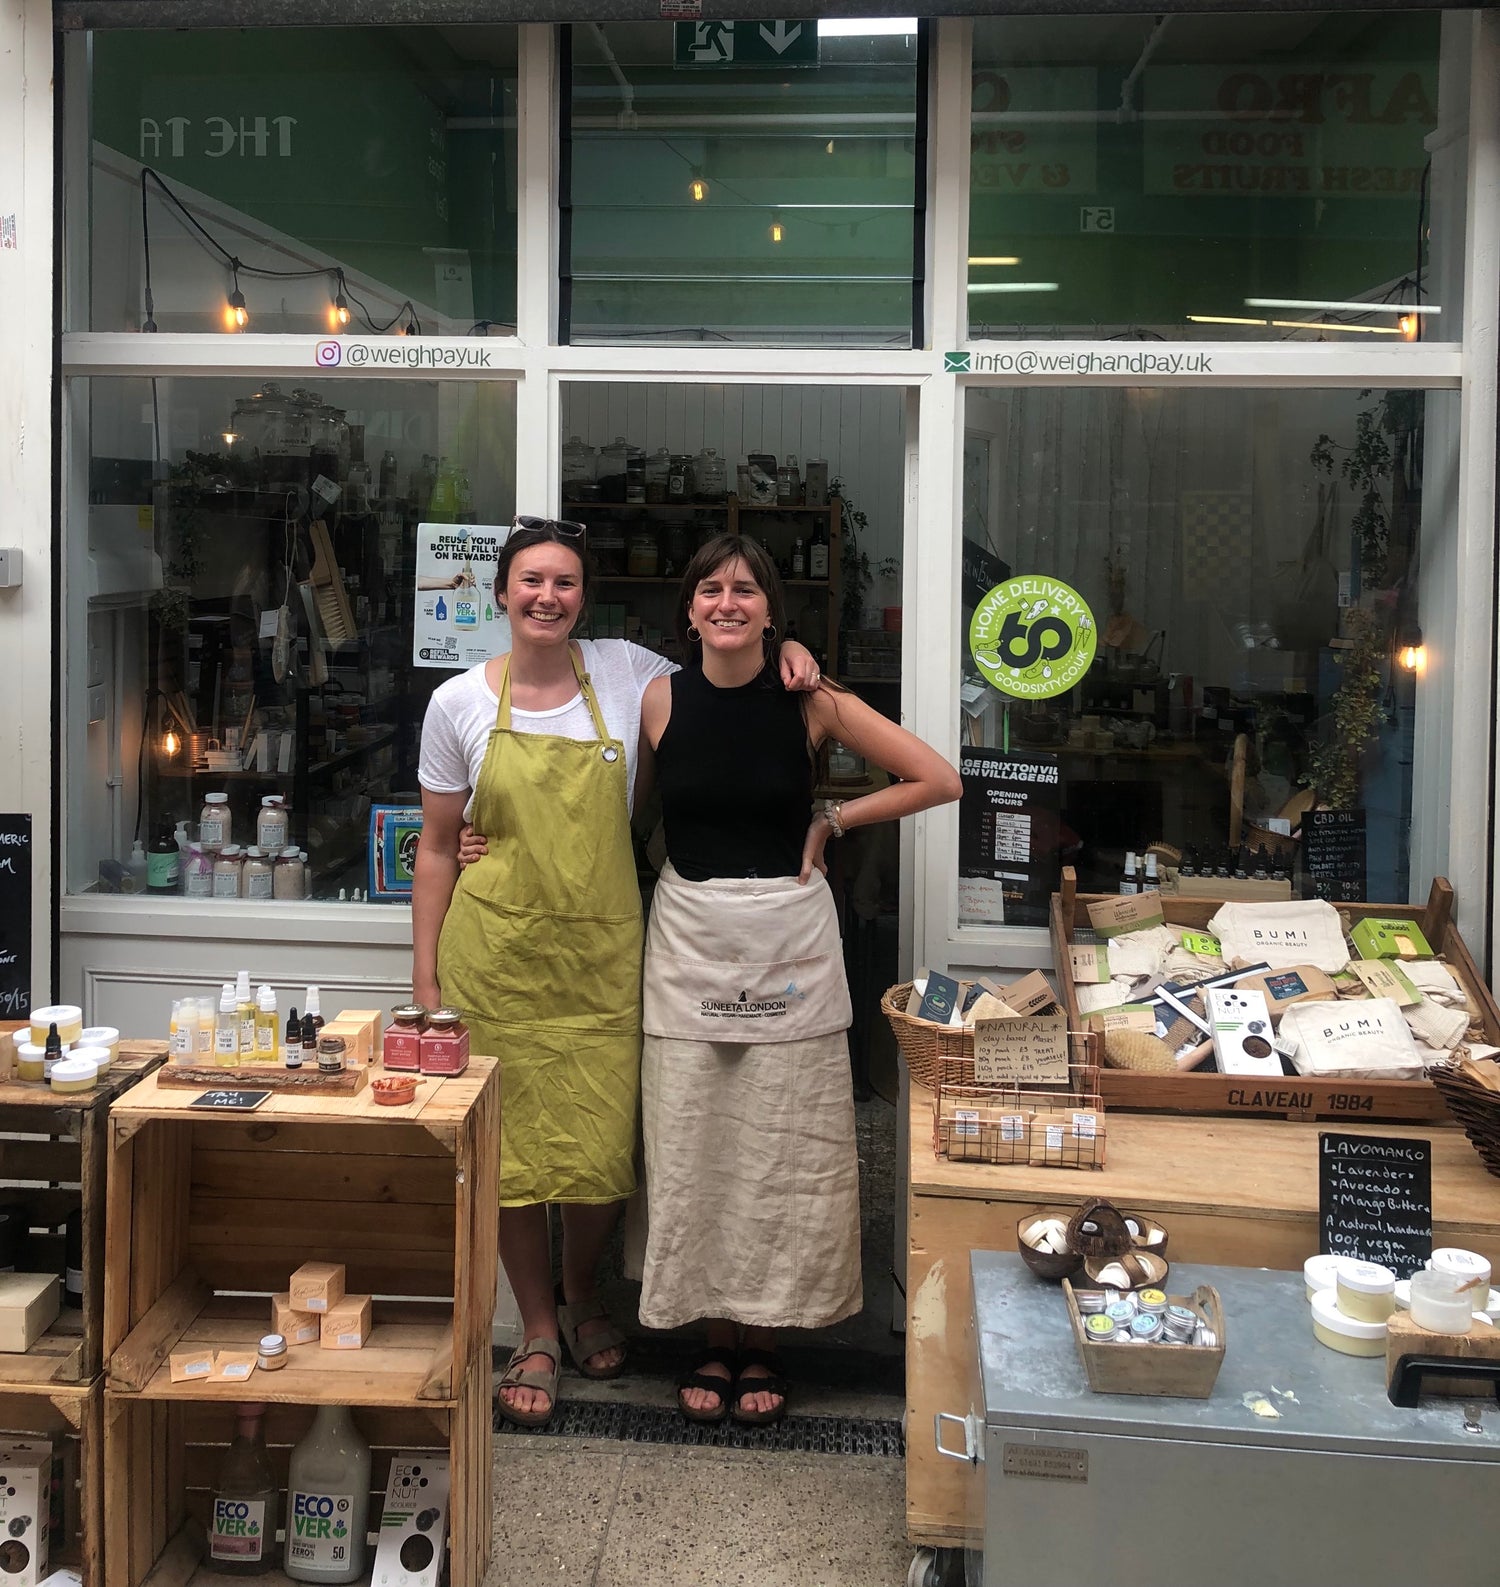 owner jennifer poust and staff in front of weigh and pay shop in brixton village, photo of two girls shopkeepers wearing aprons